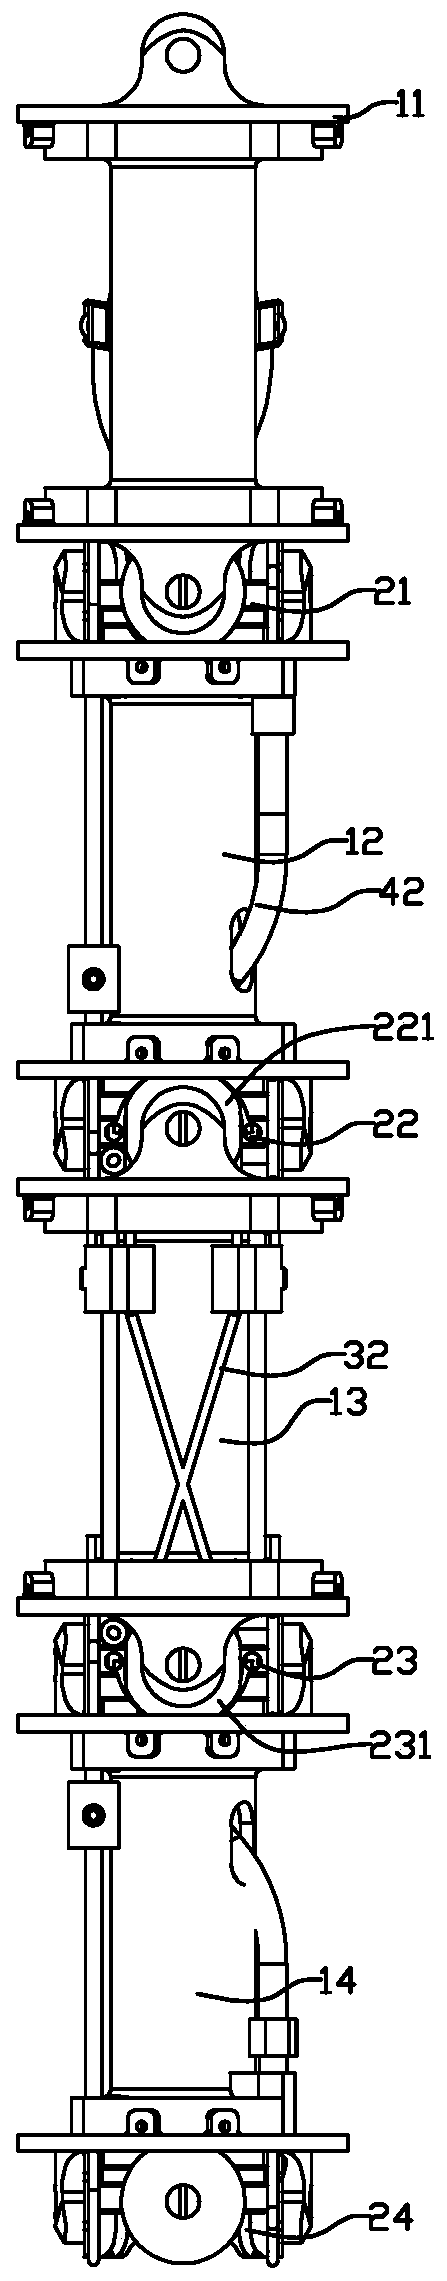 A linkage joint group and mechanical arm capable of continuous constant curvature bending